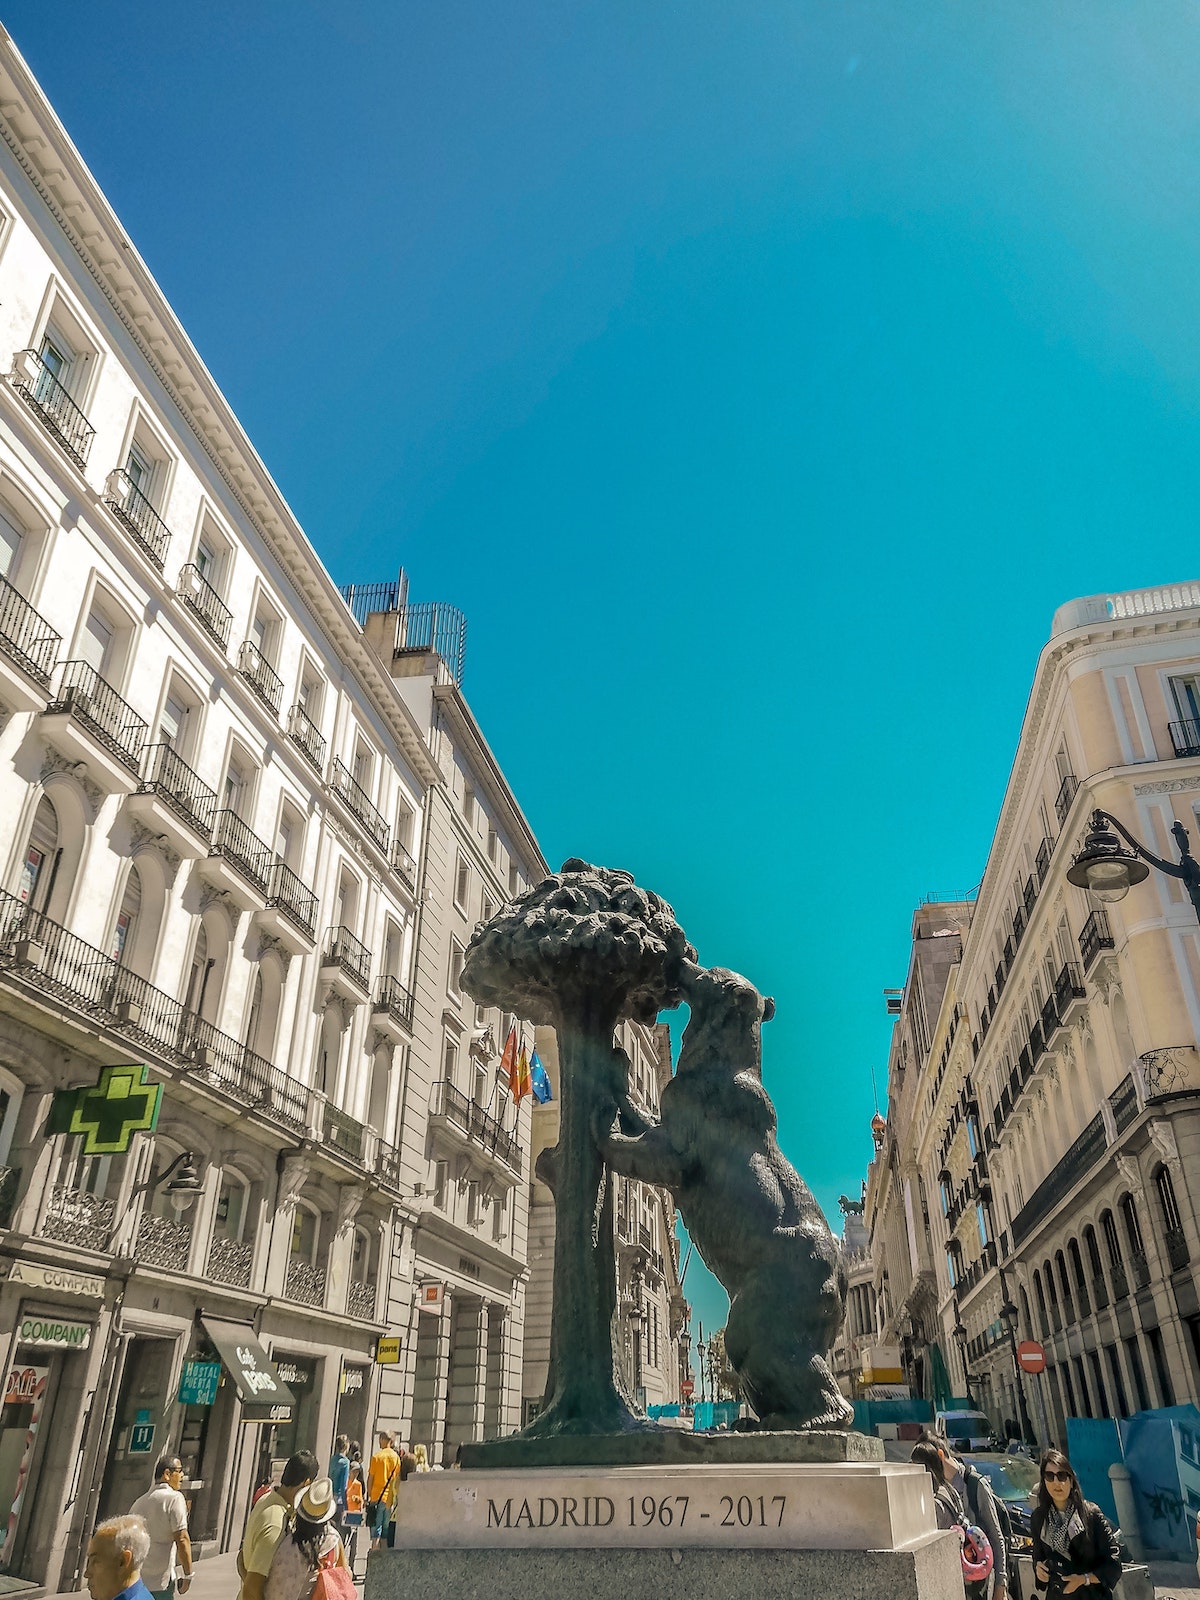 Statue of a bear eating from a strawberry tree in the Puerta del Sol square in Madrid.